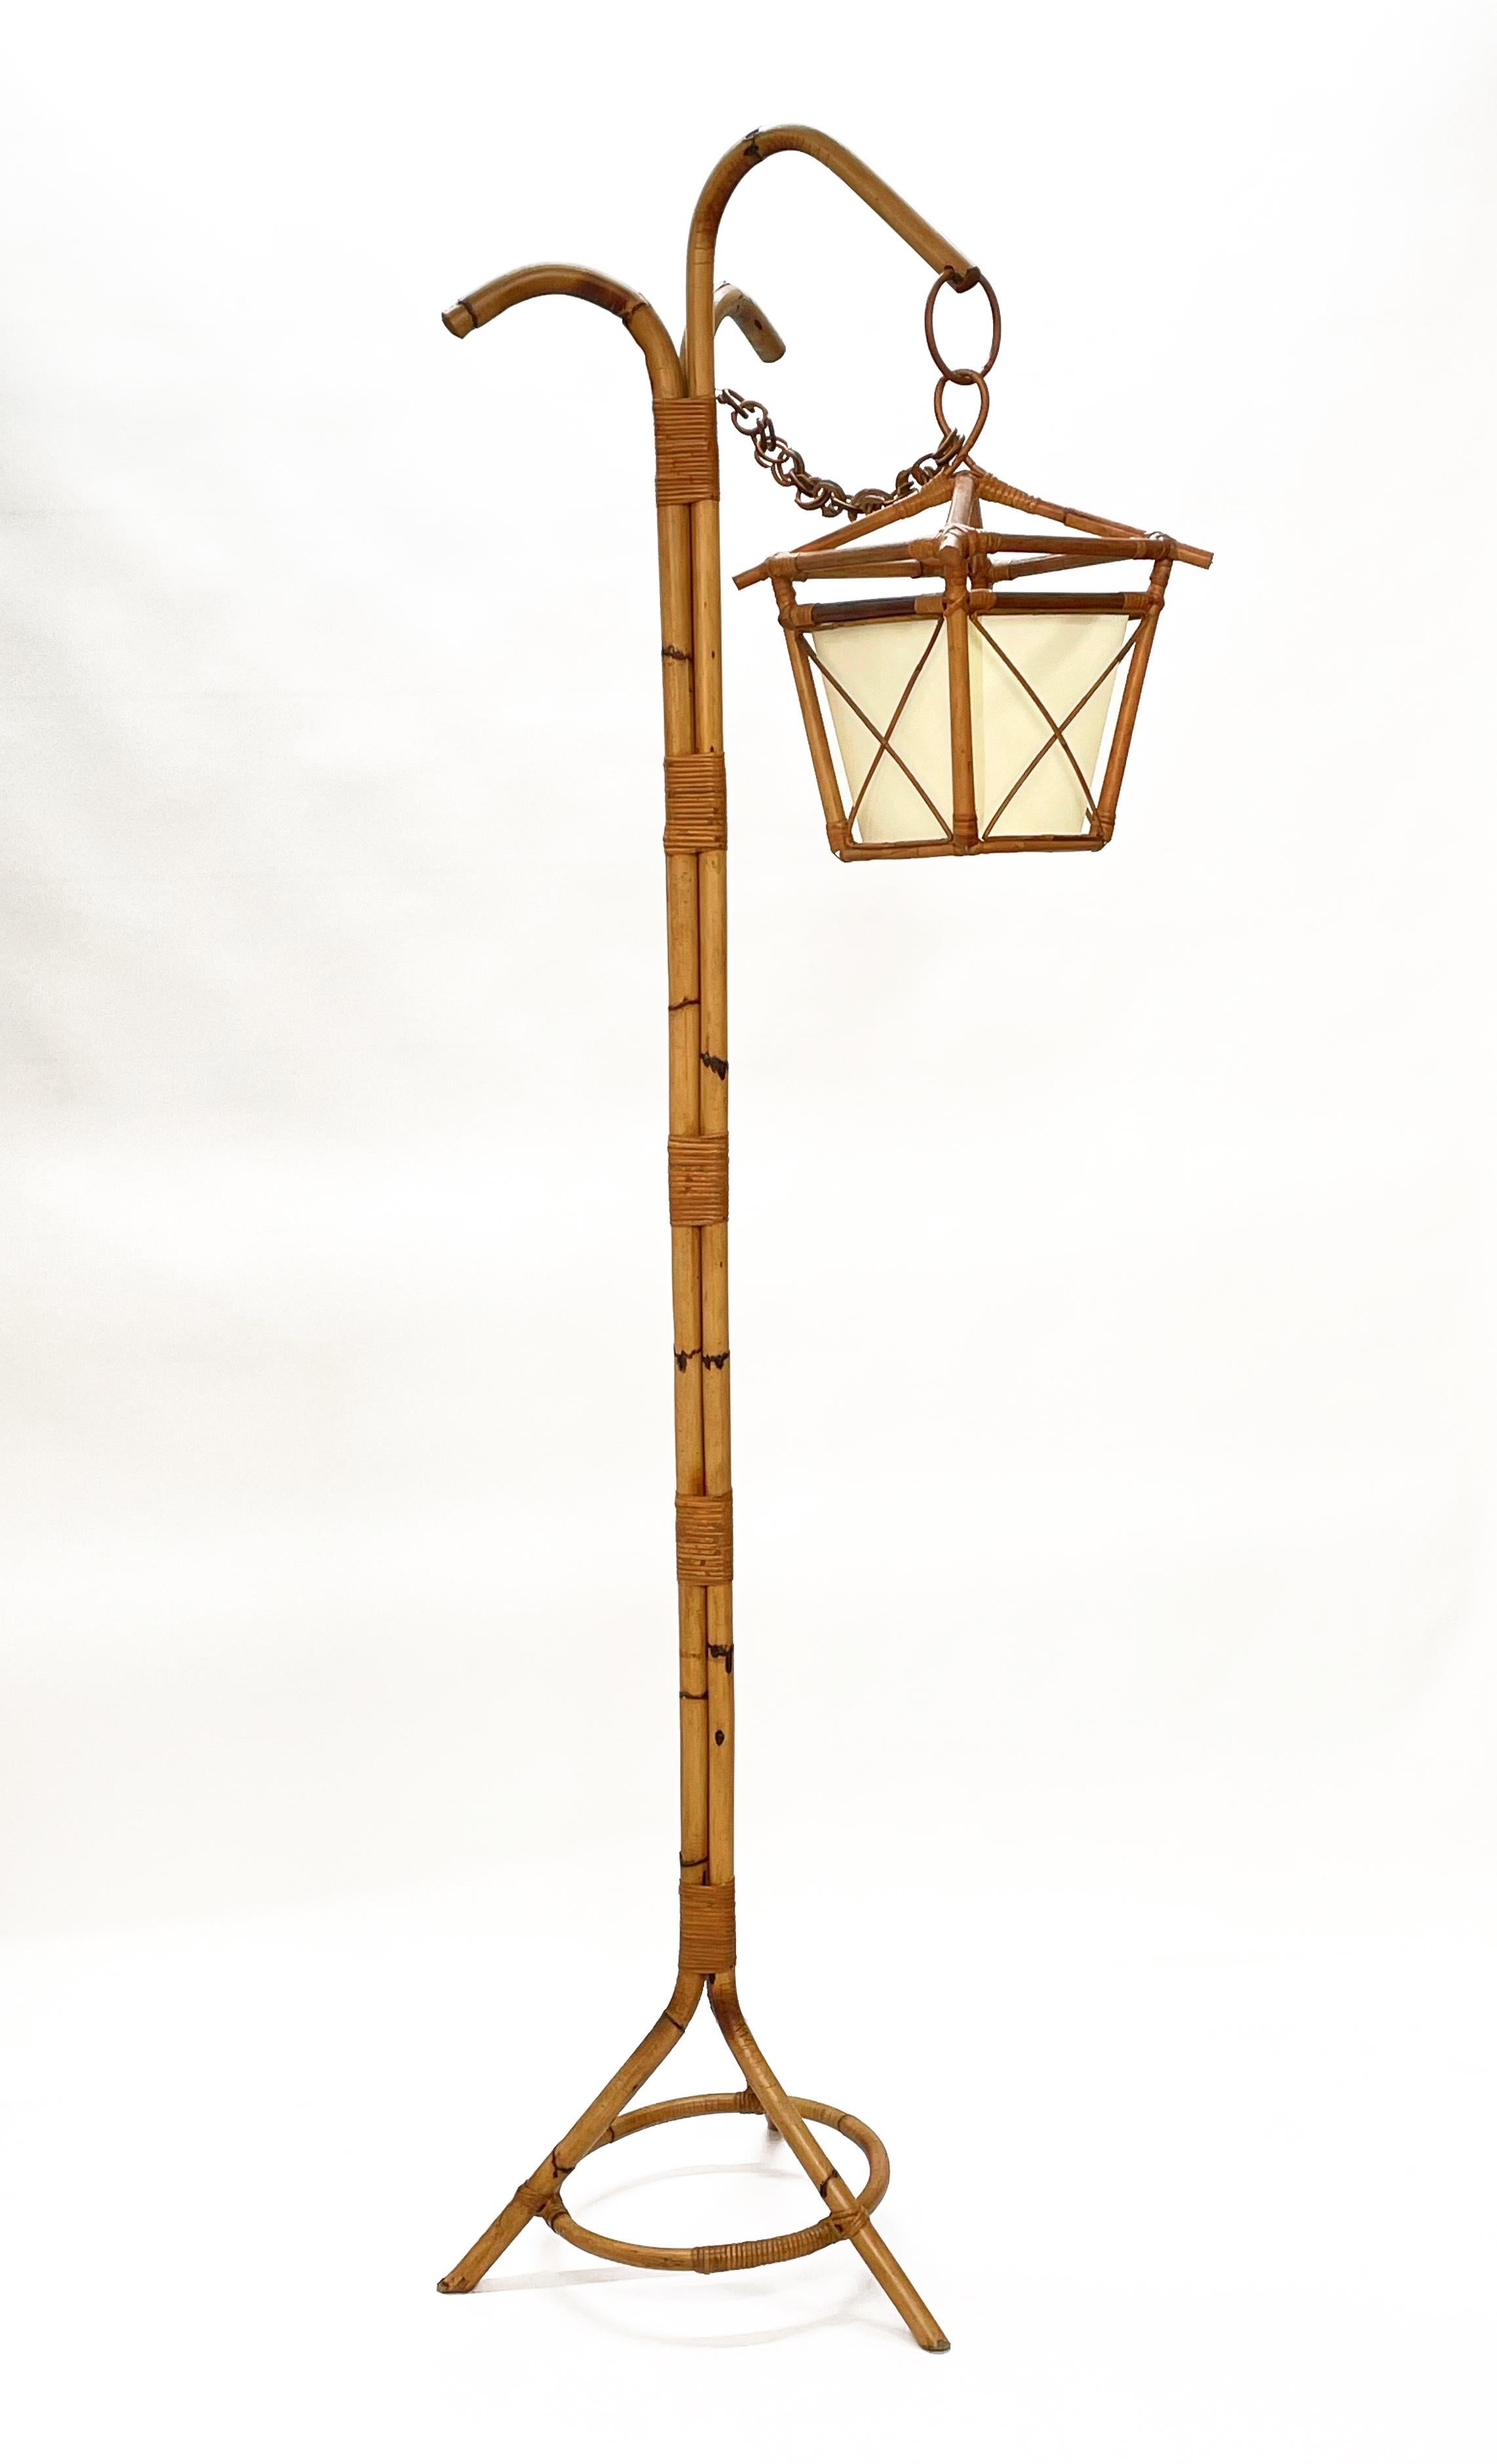 Midcentury Bamboo and Rattan Italian Floor Lamp with Tripod Base, 1950s For Sale 6